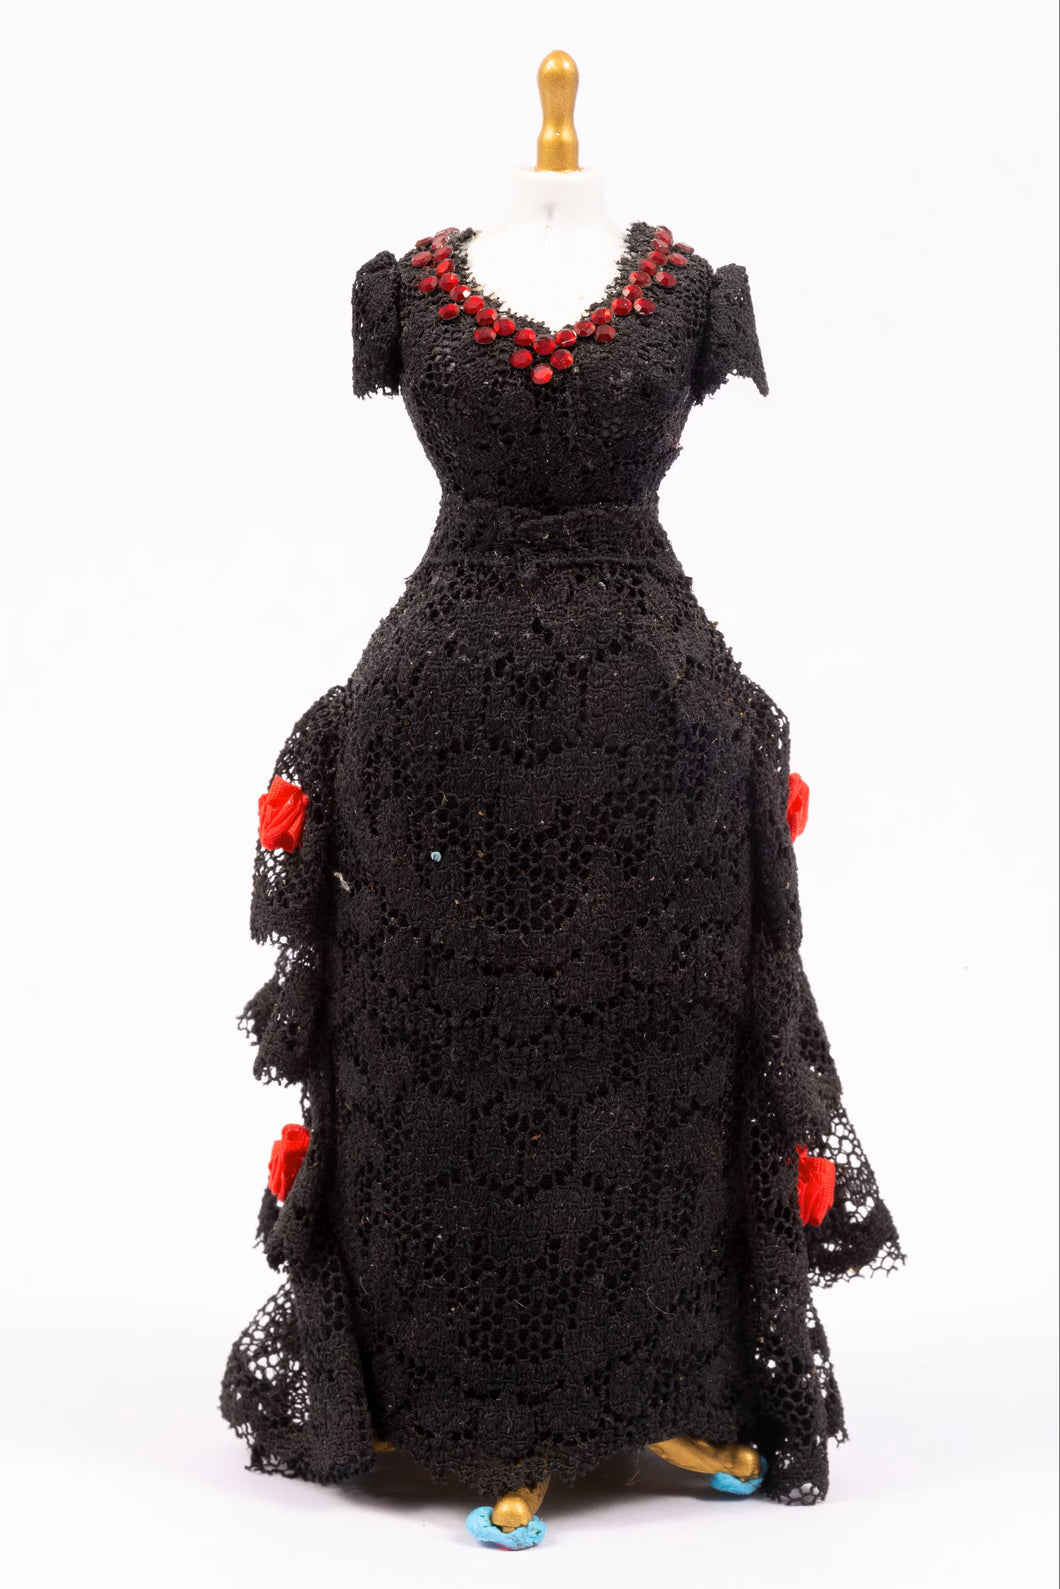 Black Lace Dress with Red Roses on Mannequin